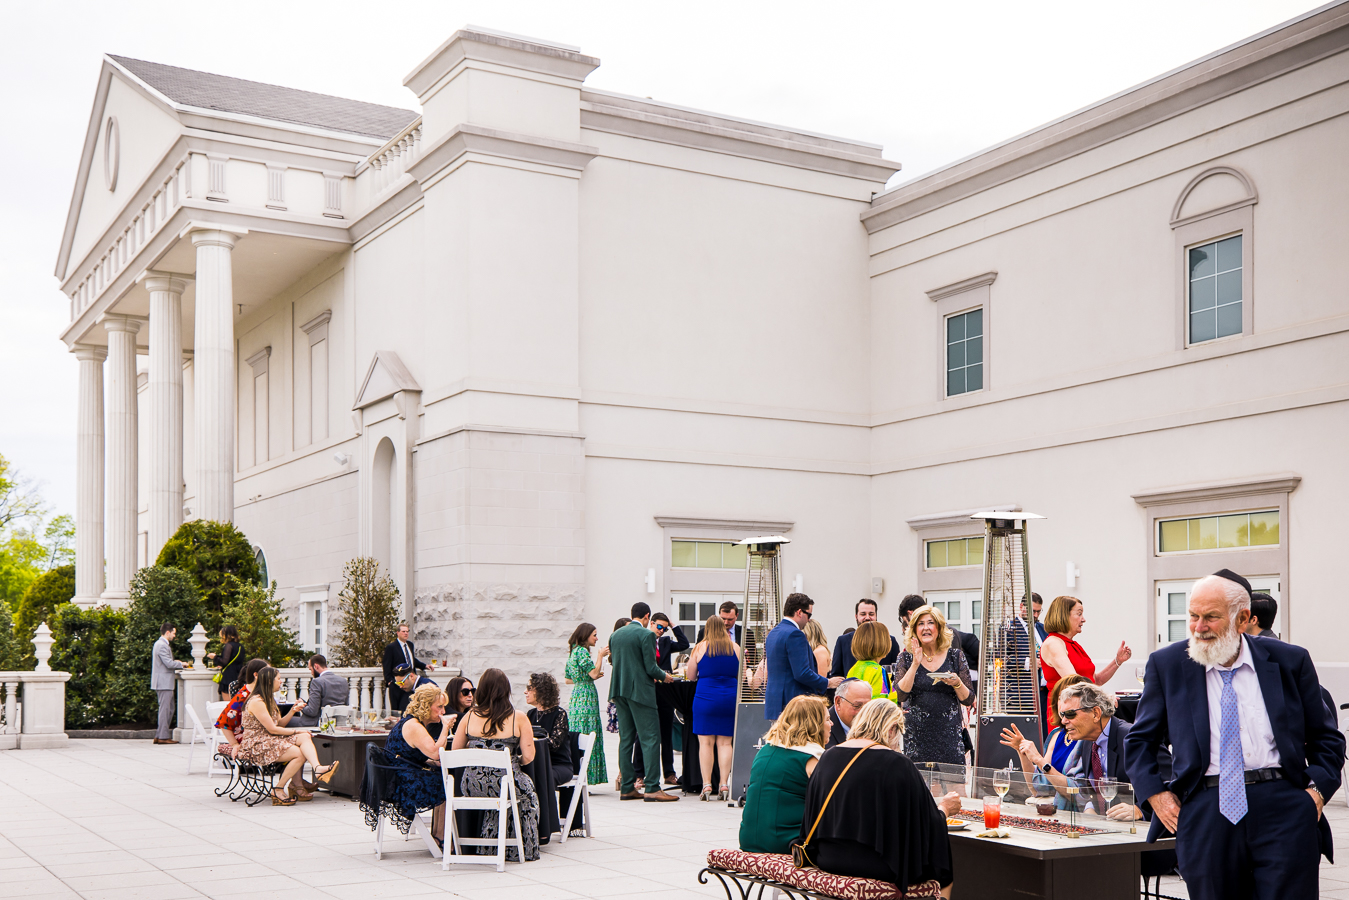 palace at somerset wedding photographer, lisa rhinehart, captures the stunning view of the palace from outside as guests mingle with one another outside on the patio 